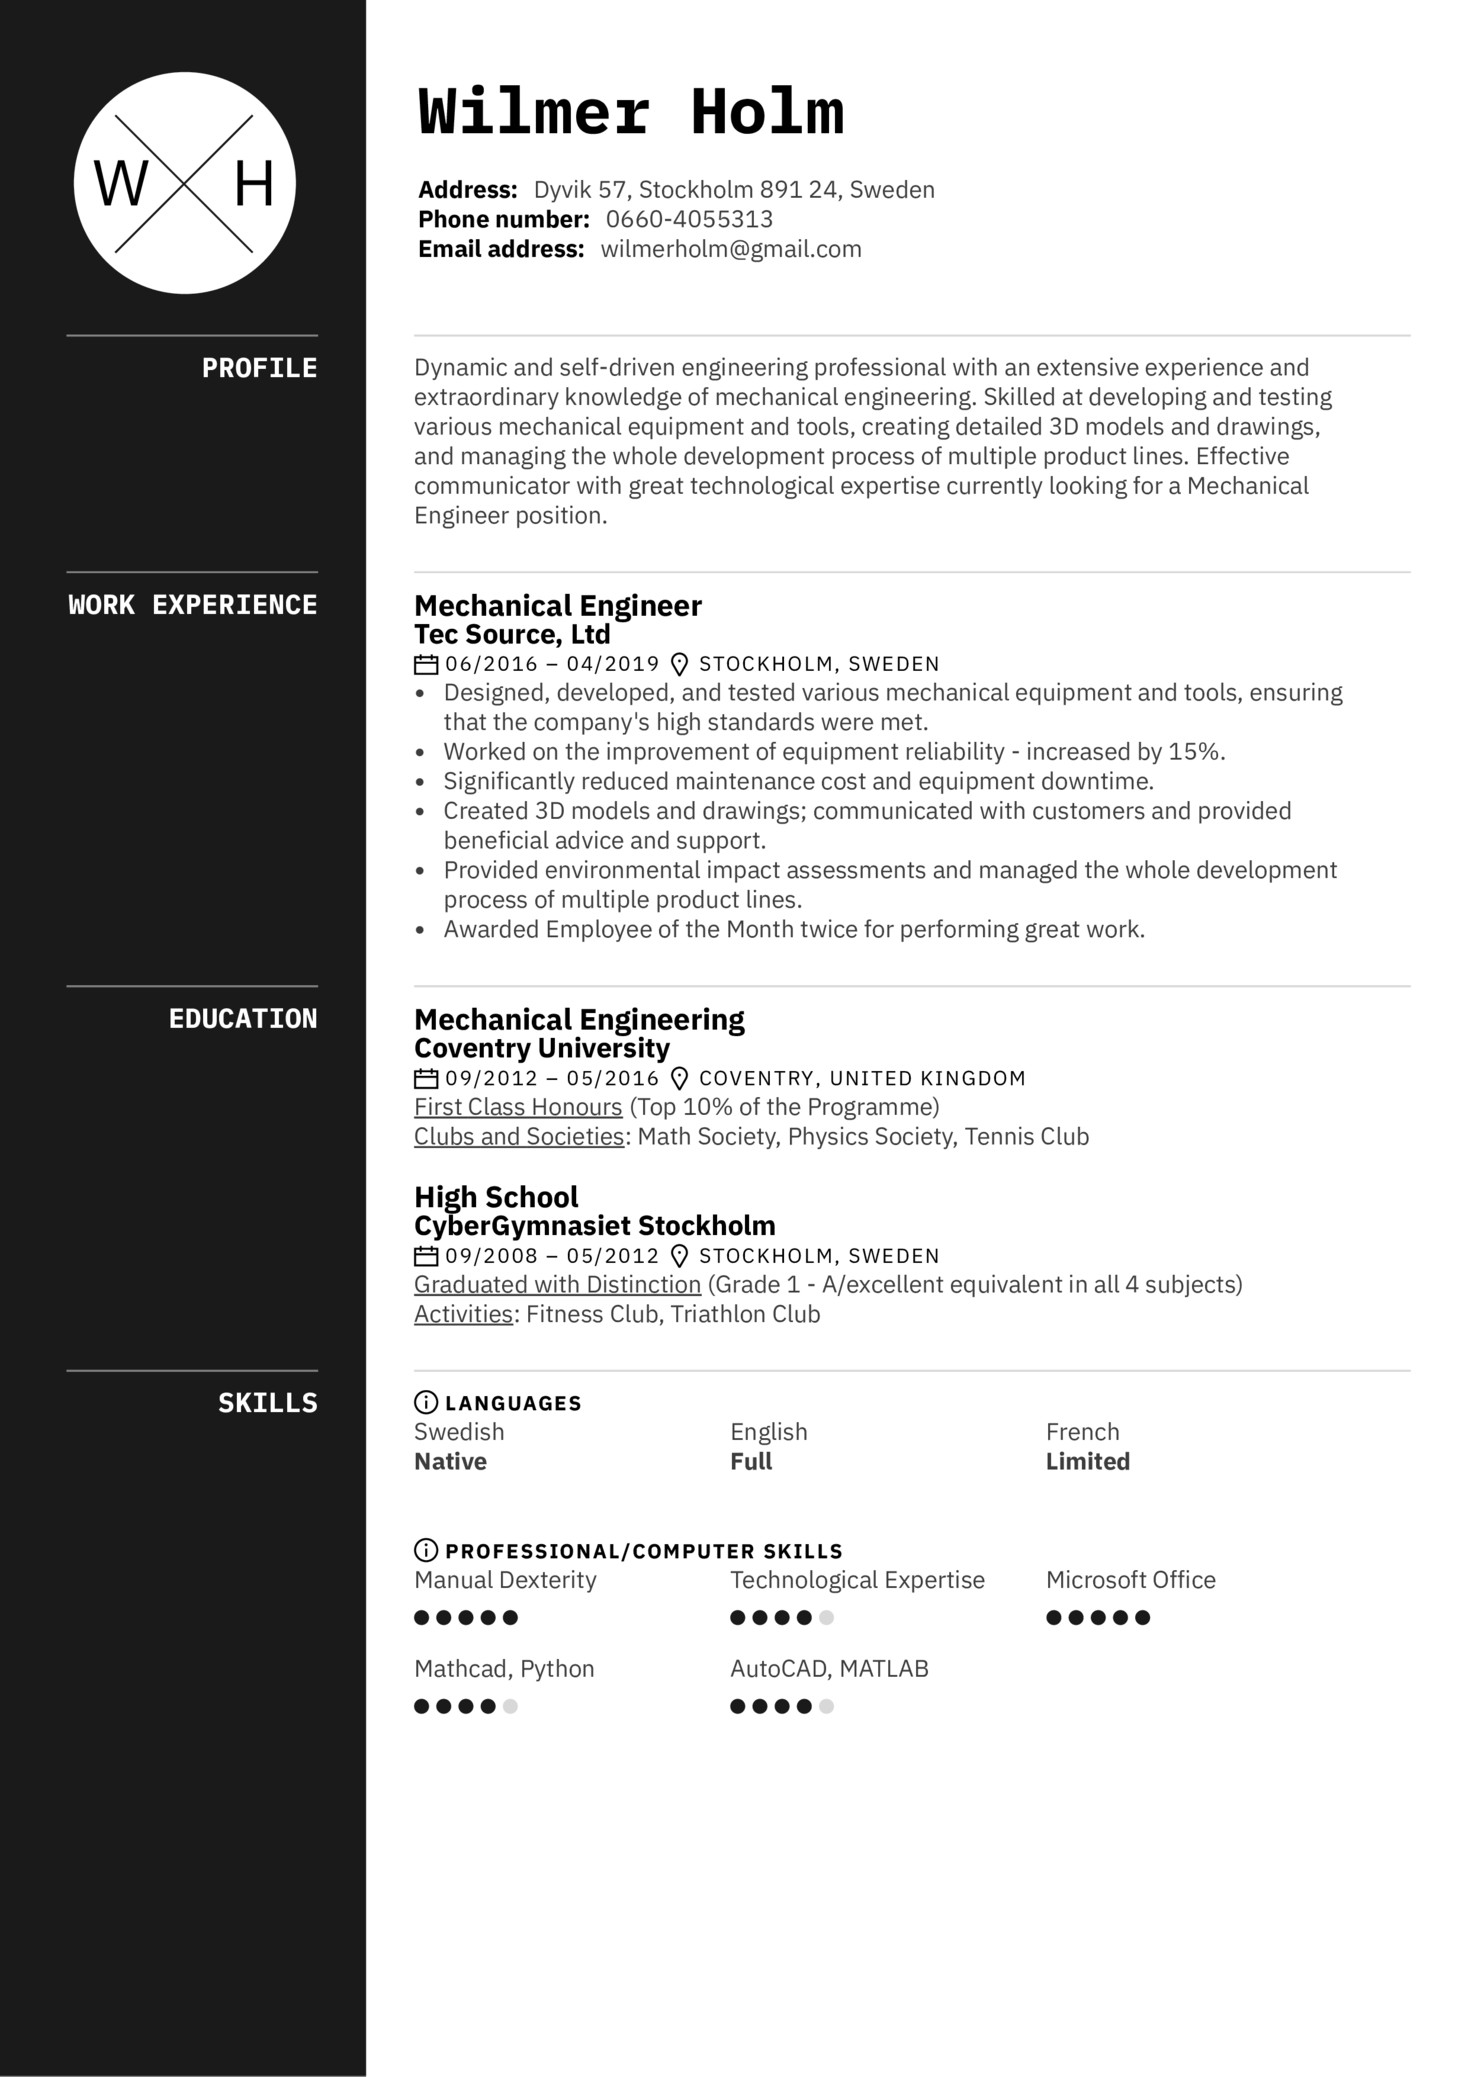 Experience Resume Sample for Mechanical Engineer Mechanical Engineer Resume Sample